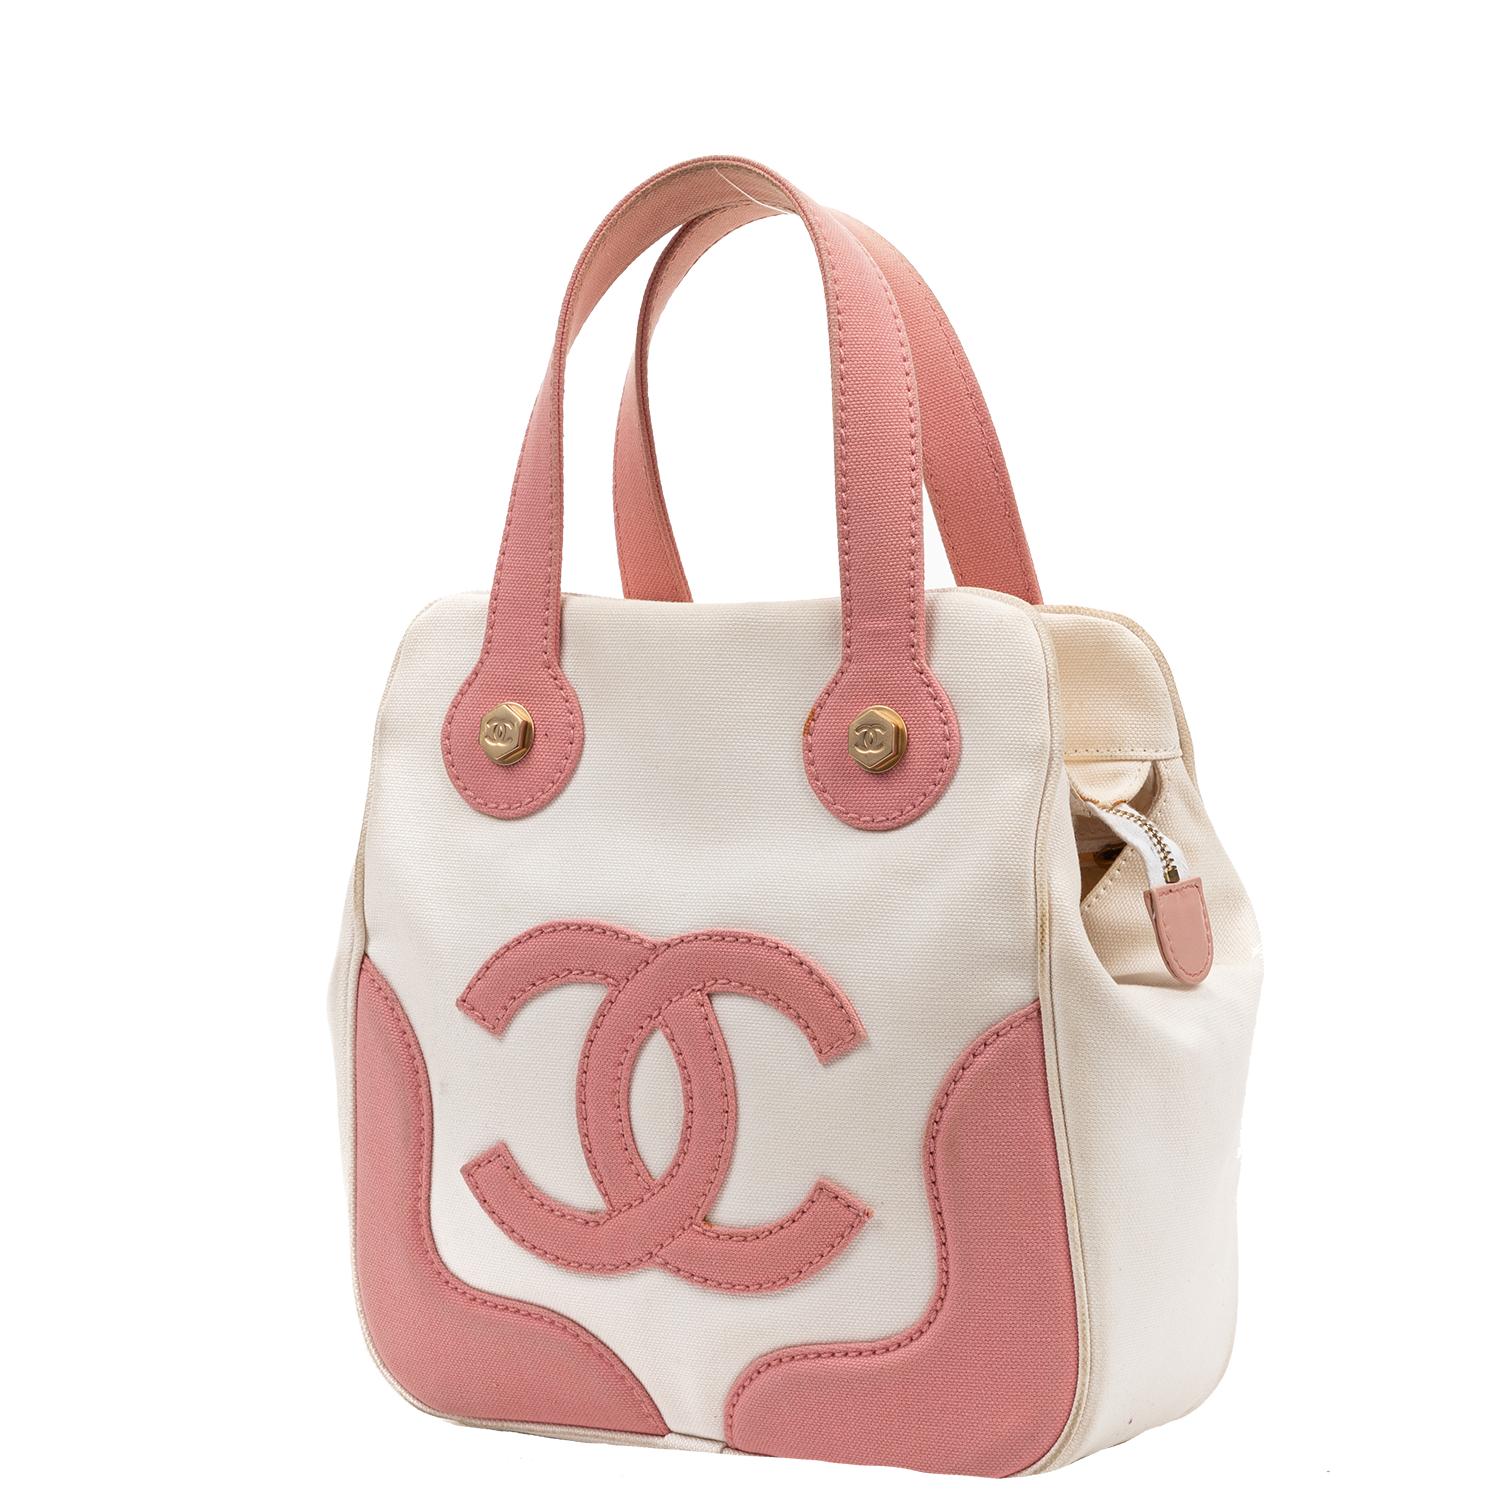 Extremely rare and fun early 2000s vintage tote!!! This adorable Chanel is crafted in white and pink canvas, brushed gold-tone hardware, and a super fun pink CC canvas logo to the front face. There are dual flat handles and protective legs at the